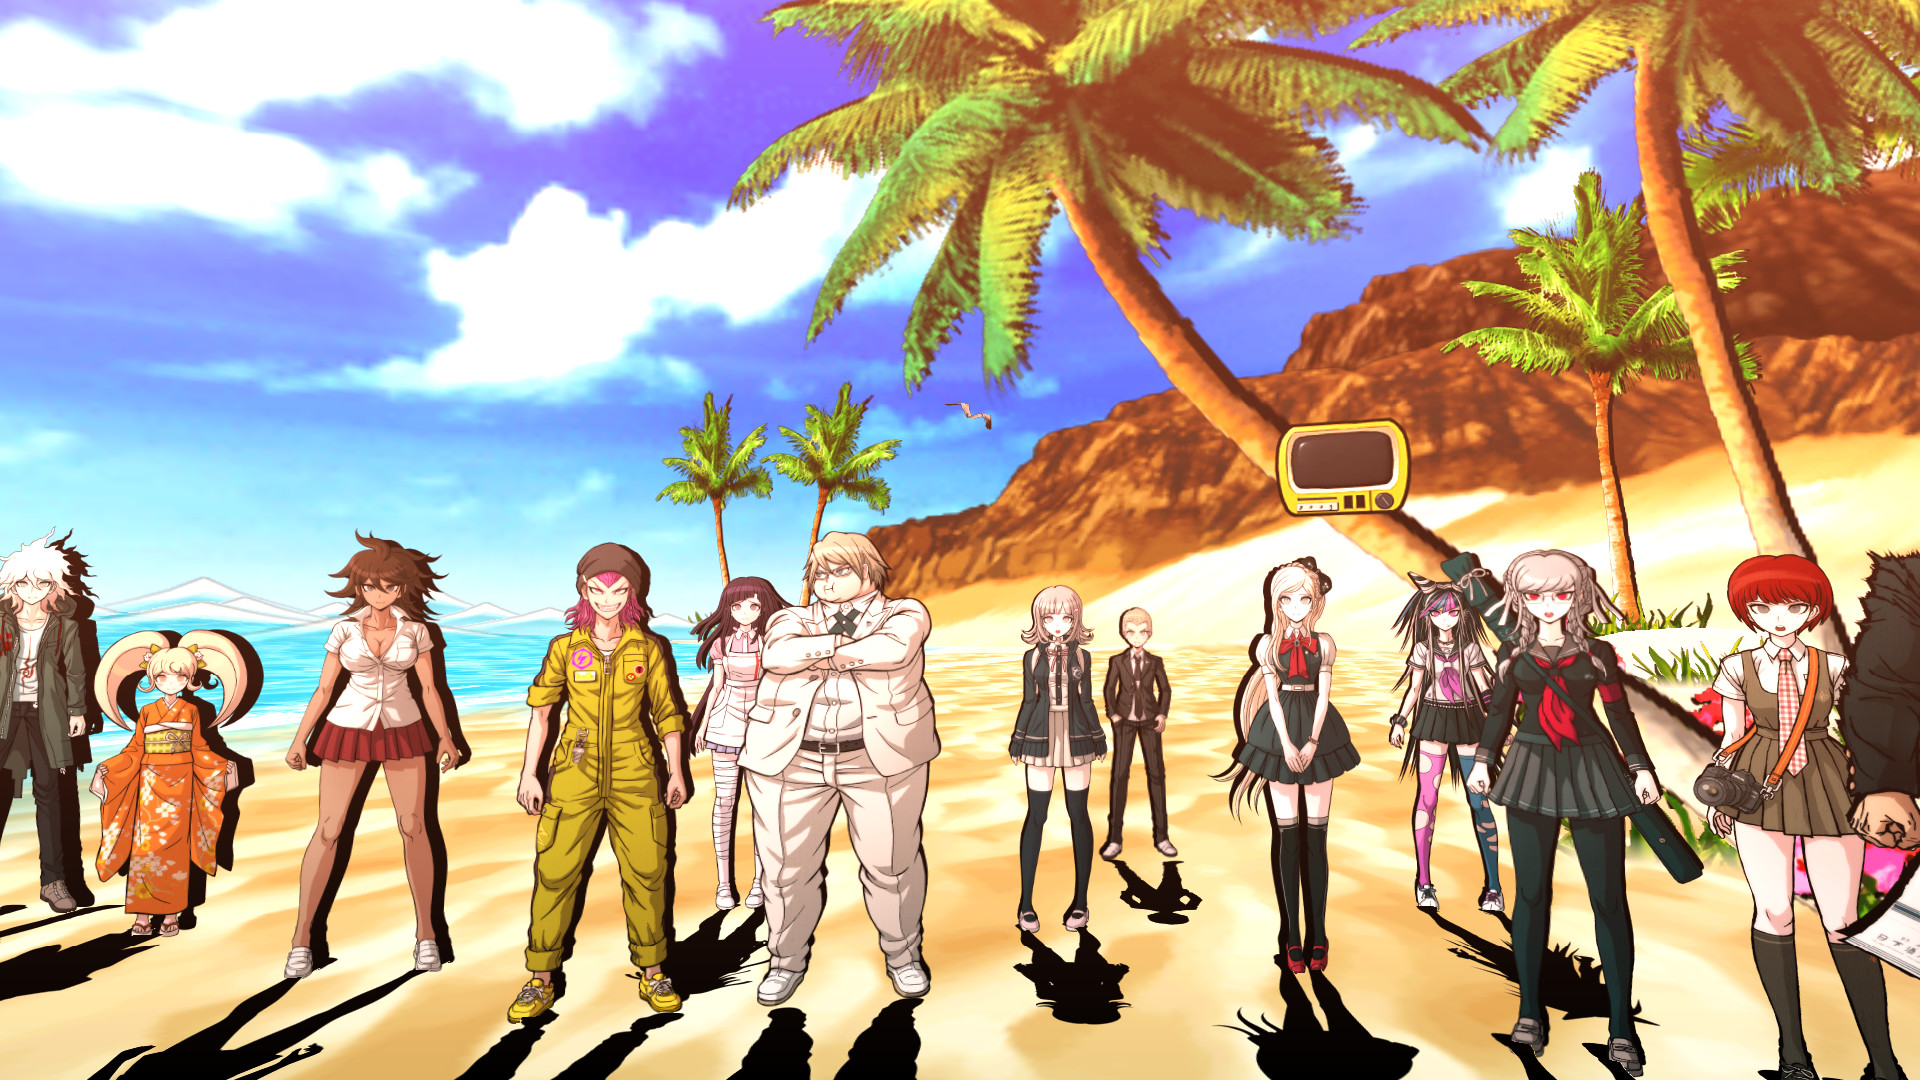 Best anime games: Danganronpa 2: Goodbye Despair. Image shows an assortment of characters on a beach.